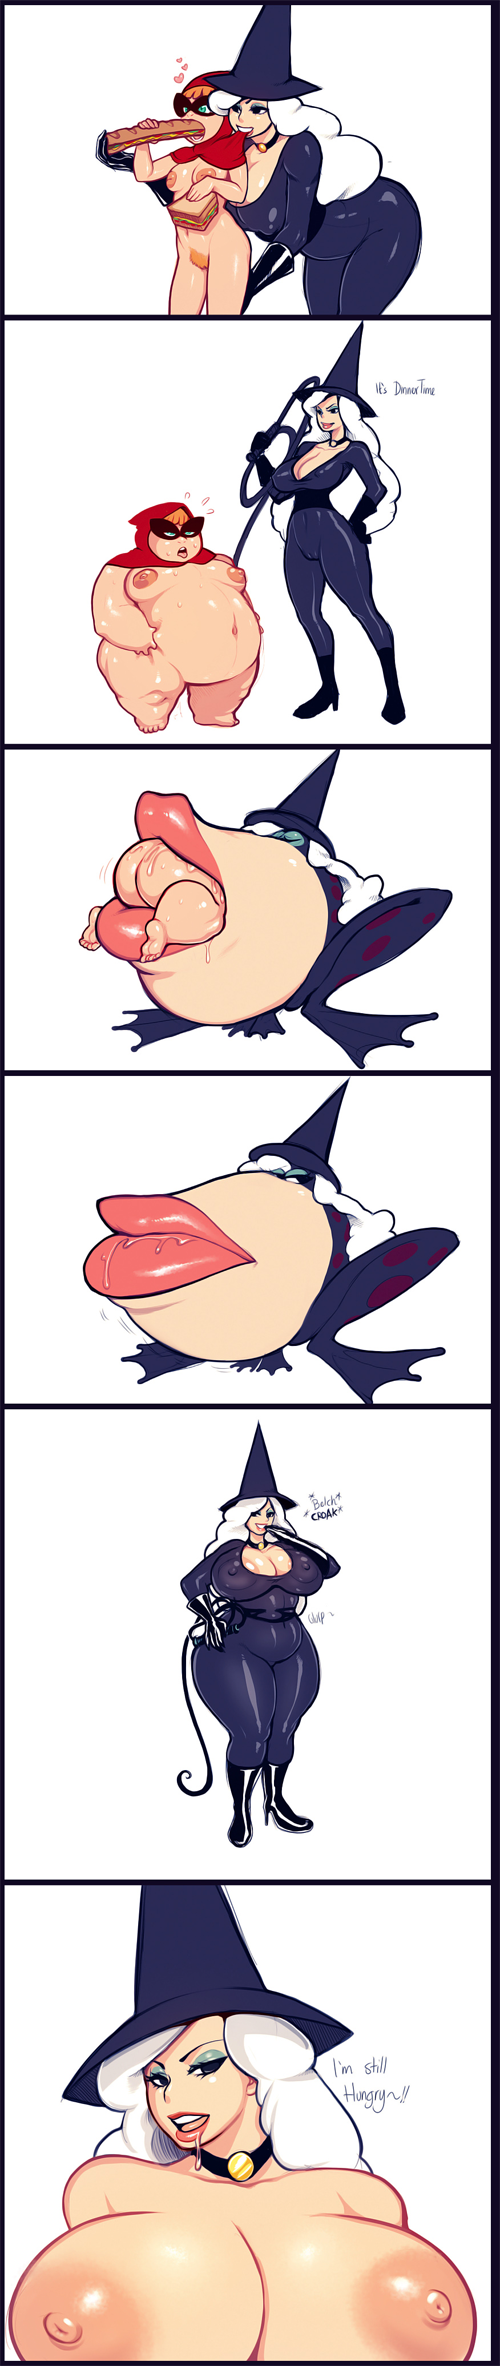 amphibian big_lips breasts butt chubby comic english_text female frog hat human lips little_red_riding_hood magic_user modeseven saliva sandwich text two_stupid_dogs vorarephilia vore whip witch witch_hat